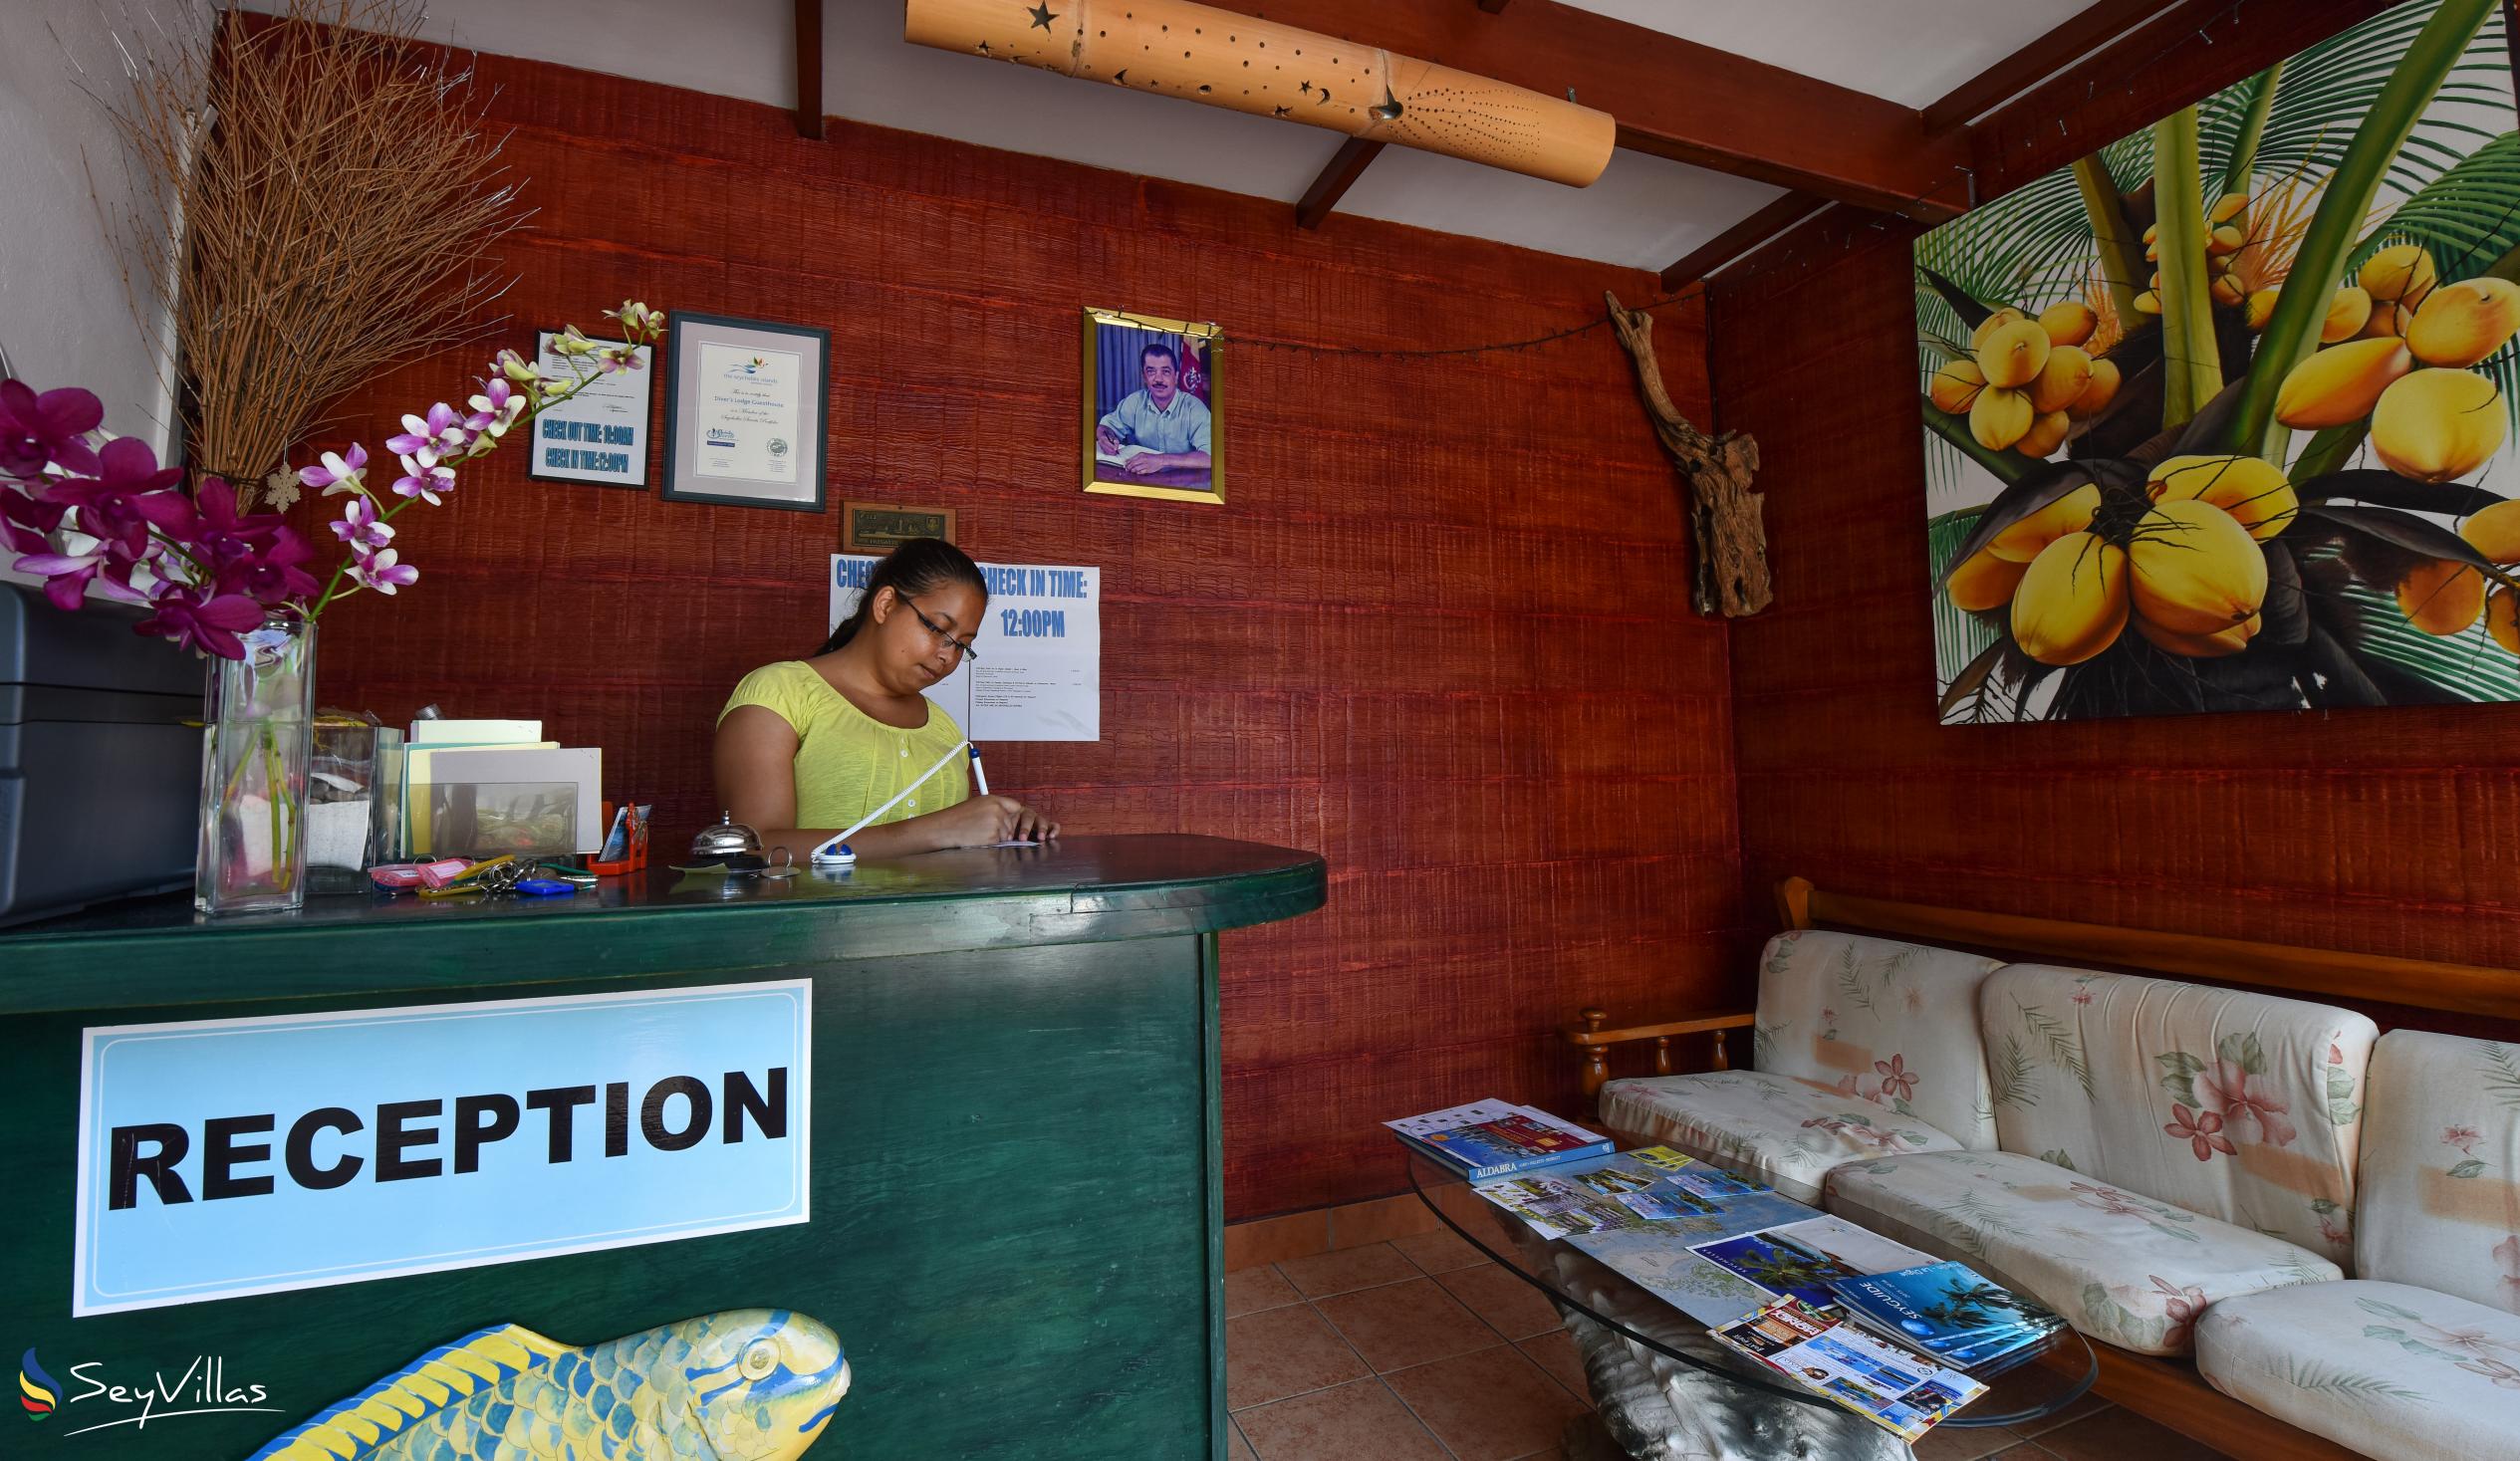 Photo 18: The Diver's Lodge - Indoor area - Mahé (Seychelles)